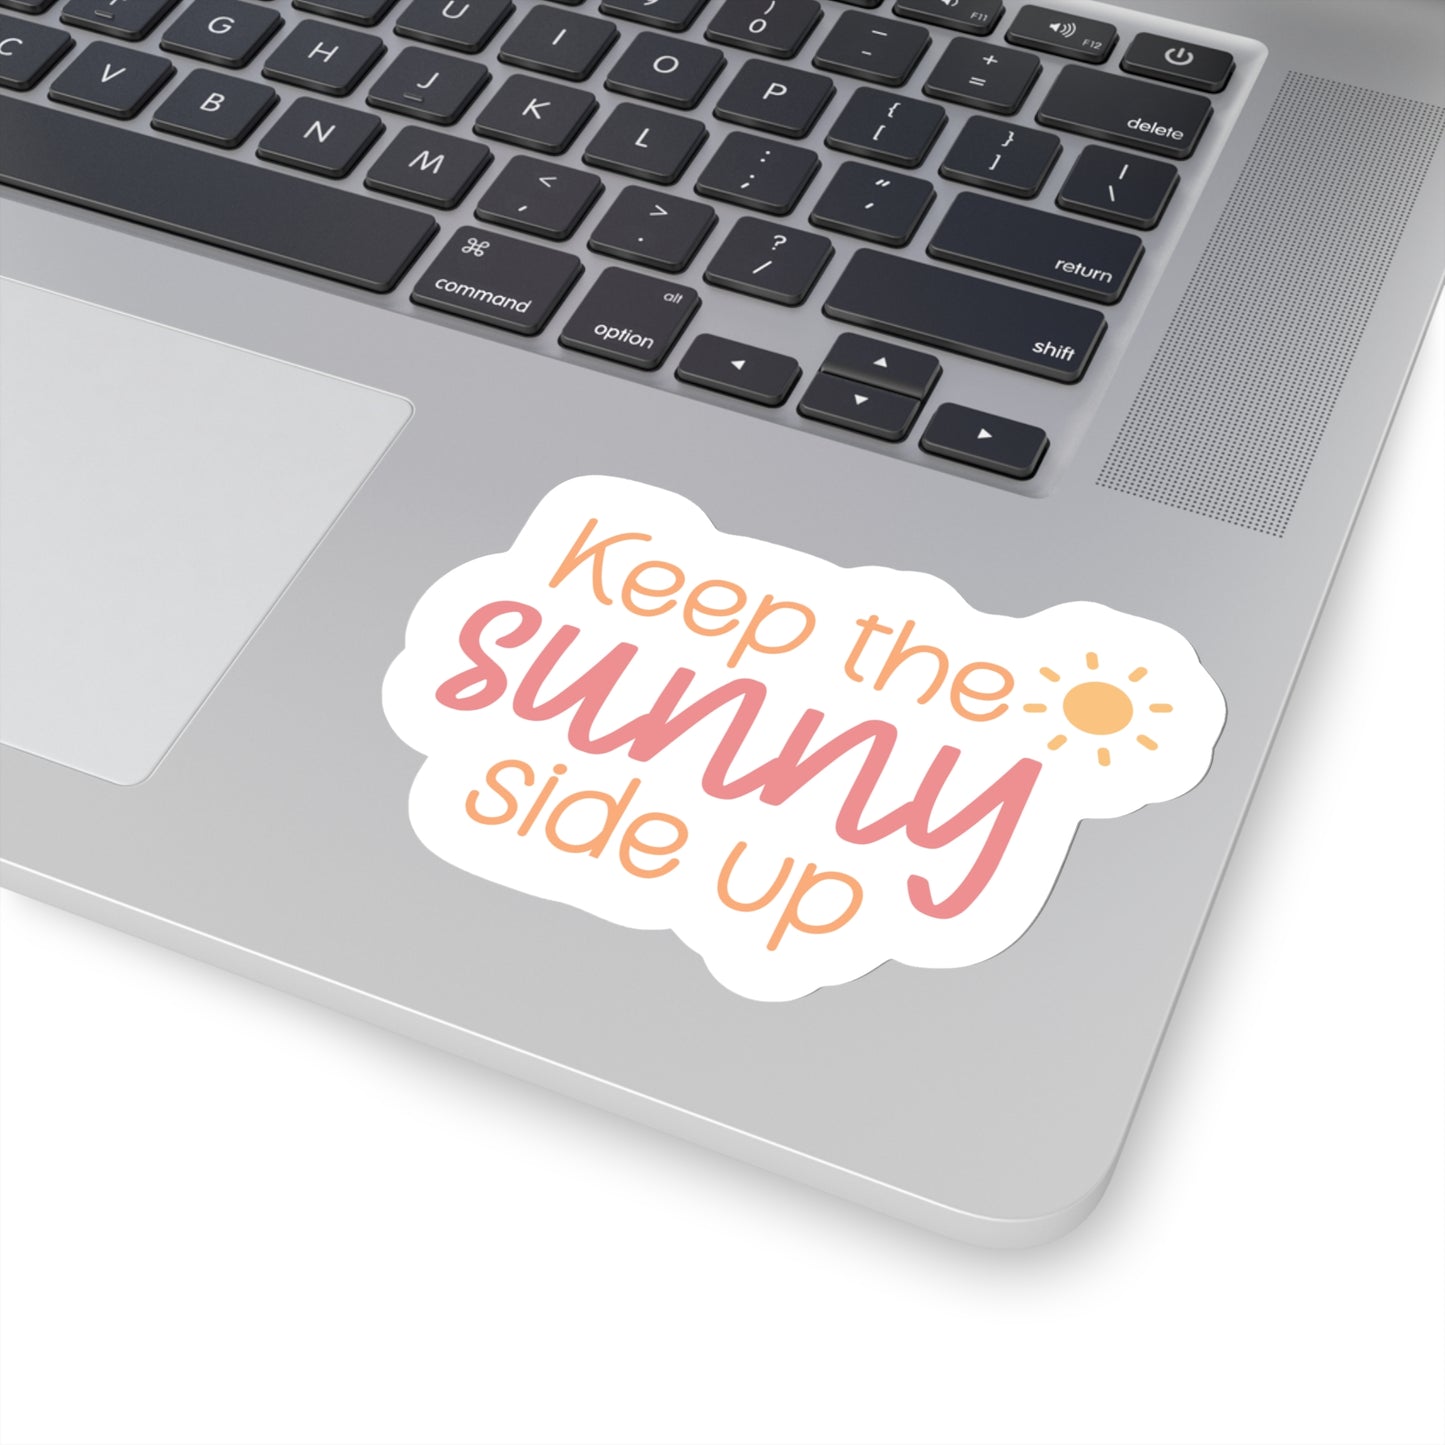 Keep the Sunny Side Up Sticker Bright Colors | Fun Stickers | Happy Stickers | Must Have Stickers | Laptop Stickers | Best Stickers